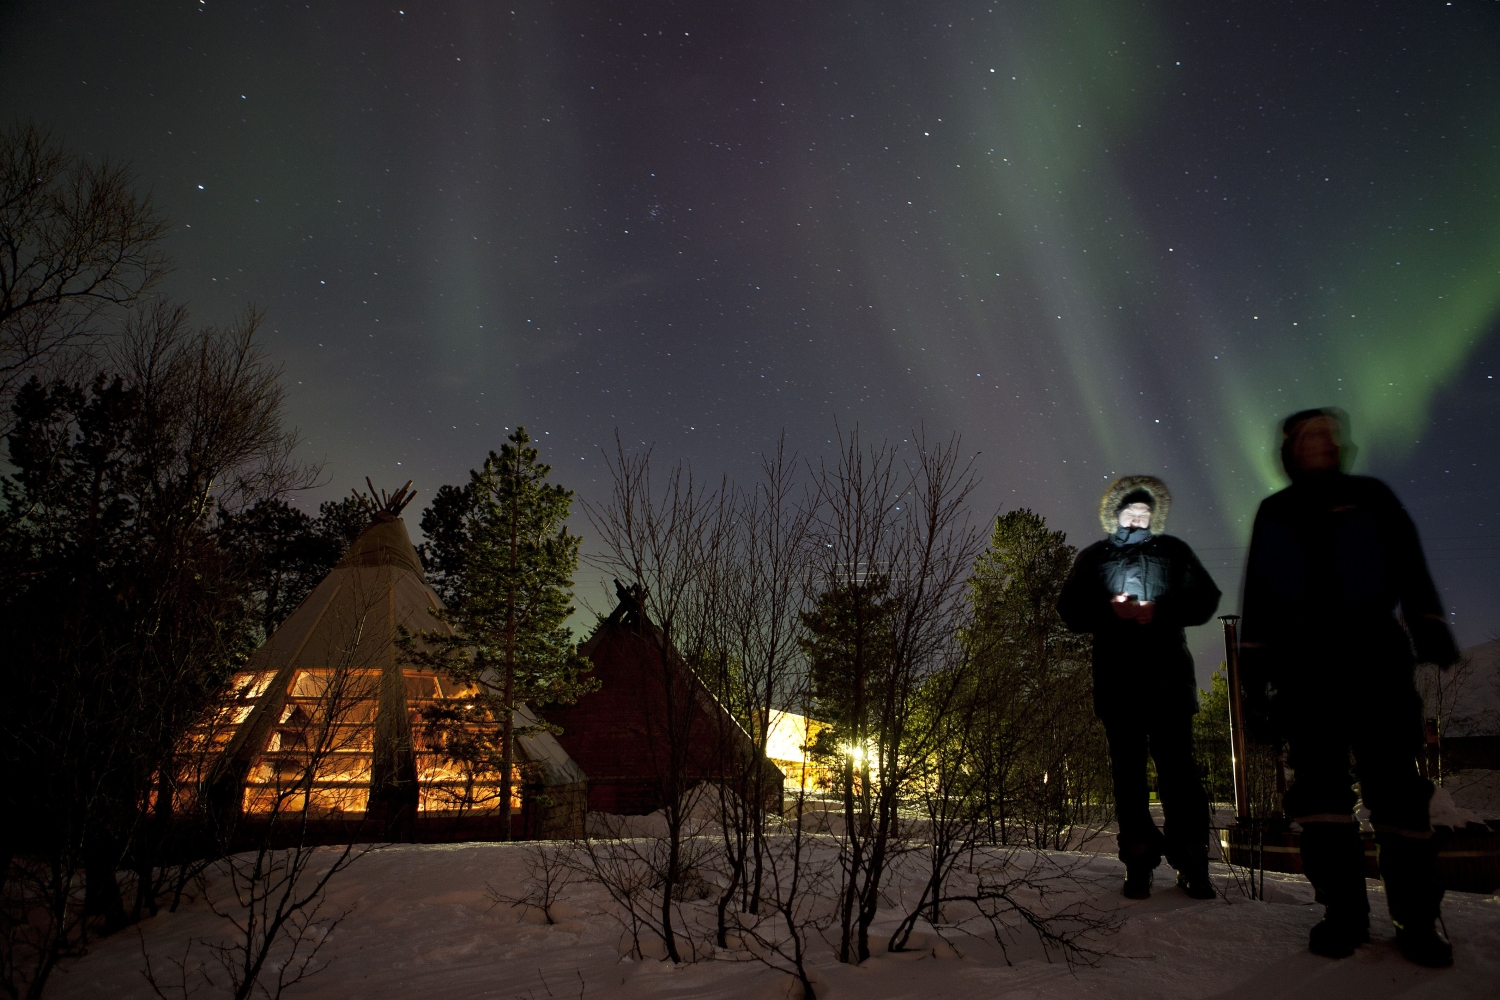 People standing outside of the gamme hut watching the Northern Lights